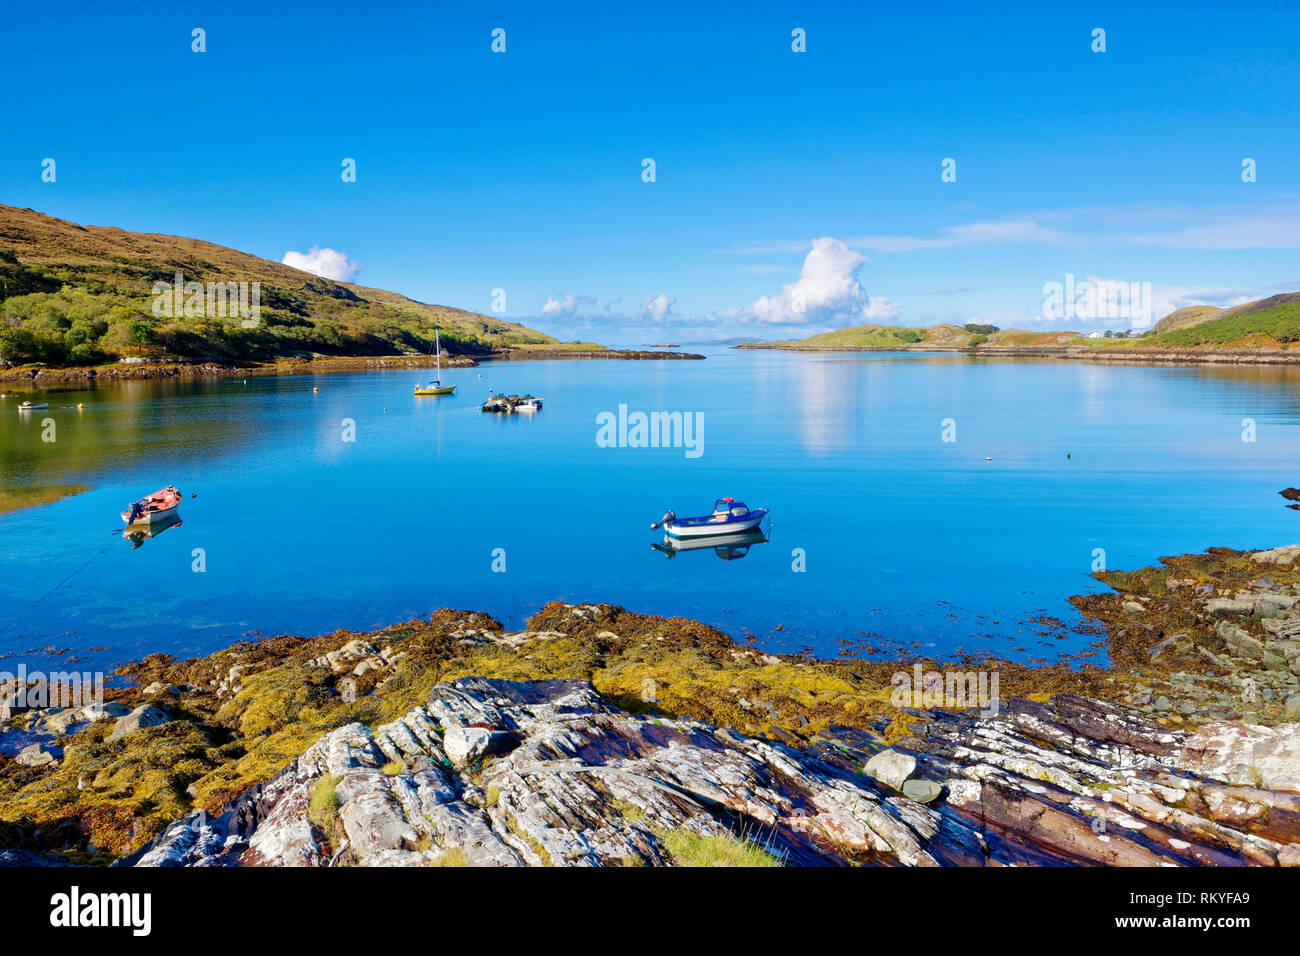 A sunny view of Killary Harbour on the west coast of Ireland. Stock Photo